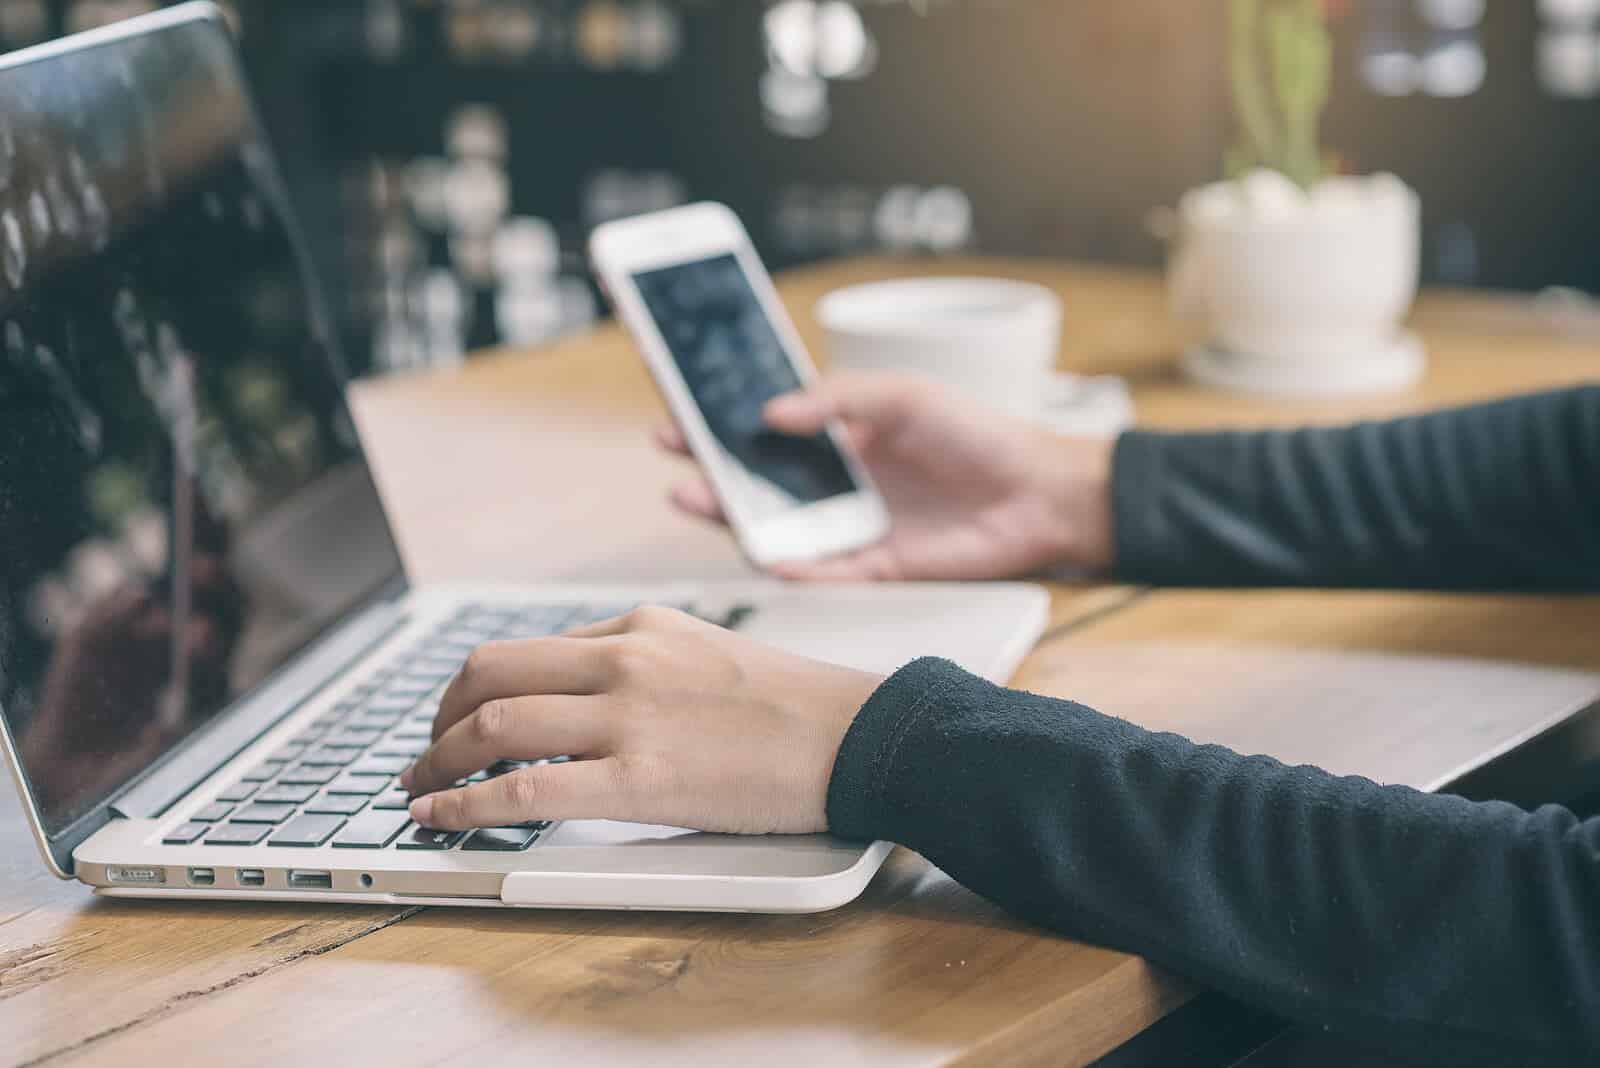 A person uses their laptop and phone at the same time. Want to learn how to create good SEO content? Our team can help you grow your SEO strategy for your practice.